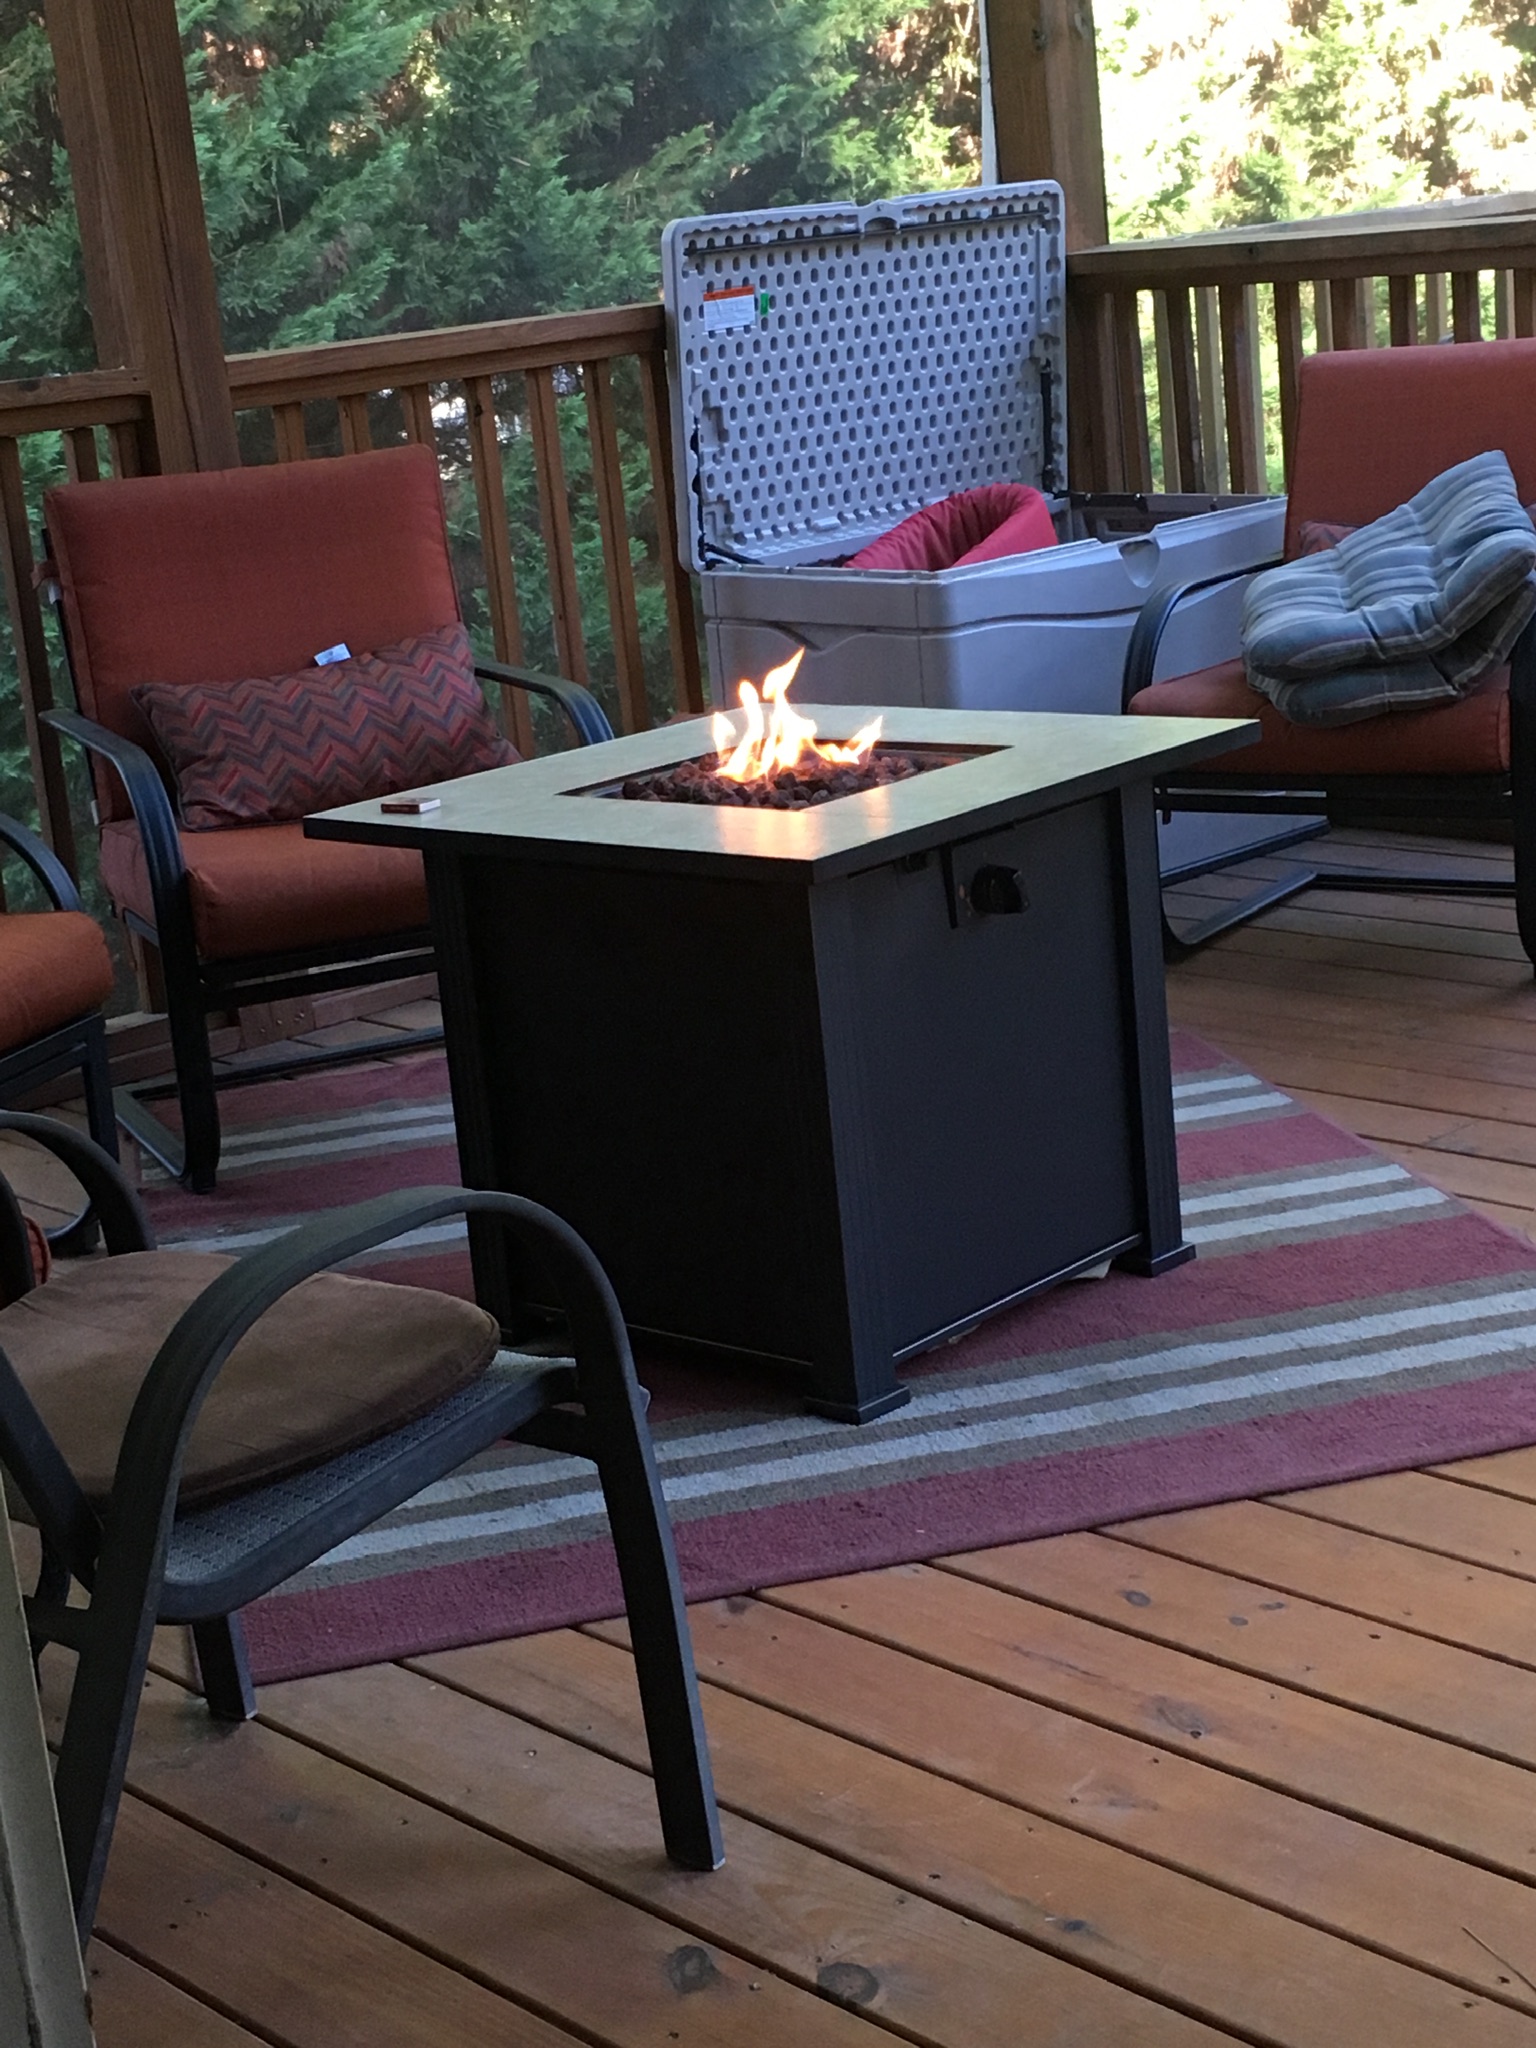 Propane fire pit in Screened Porch (fireplaces, townhome, heat, ceiling) -  House -remodeling, decorating, construction, energy use, kitchen, bathroom,  bedroom, building, rooms - City-Data Forum